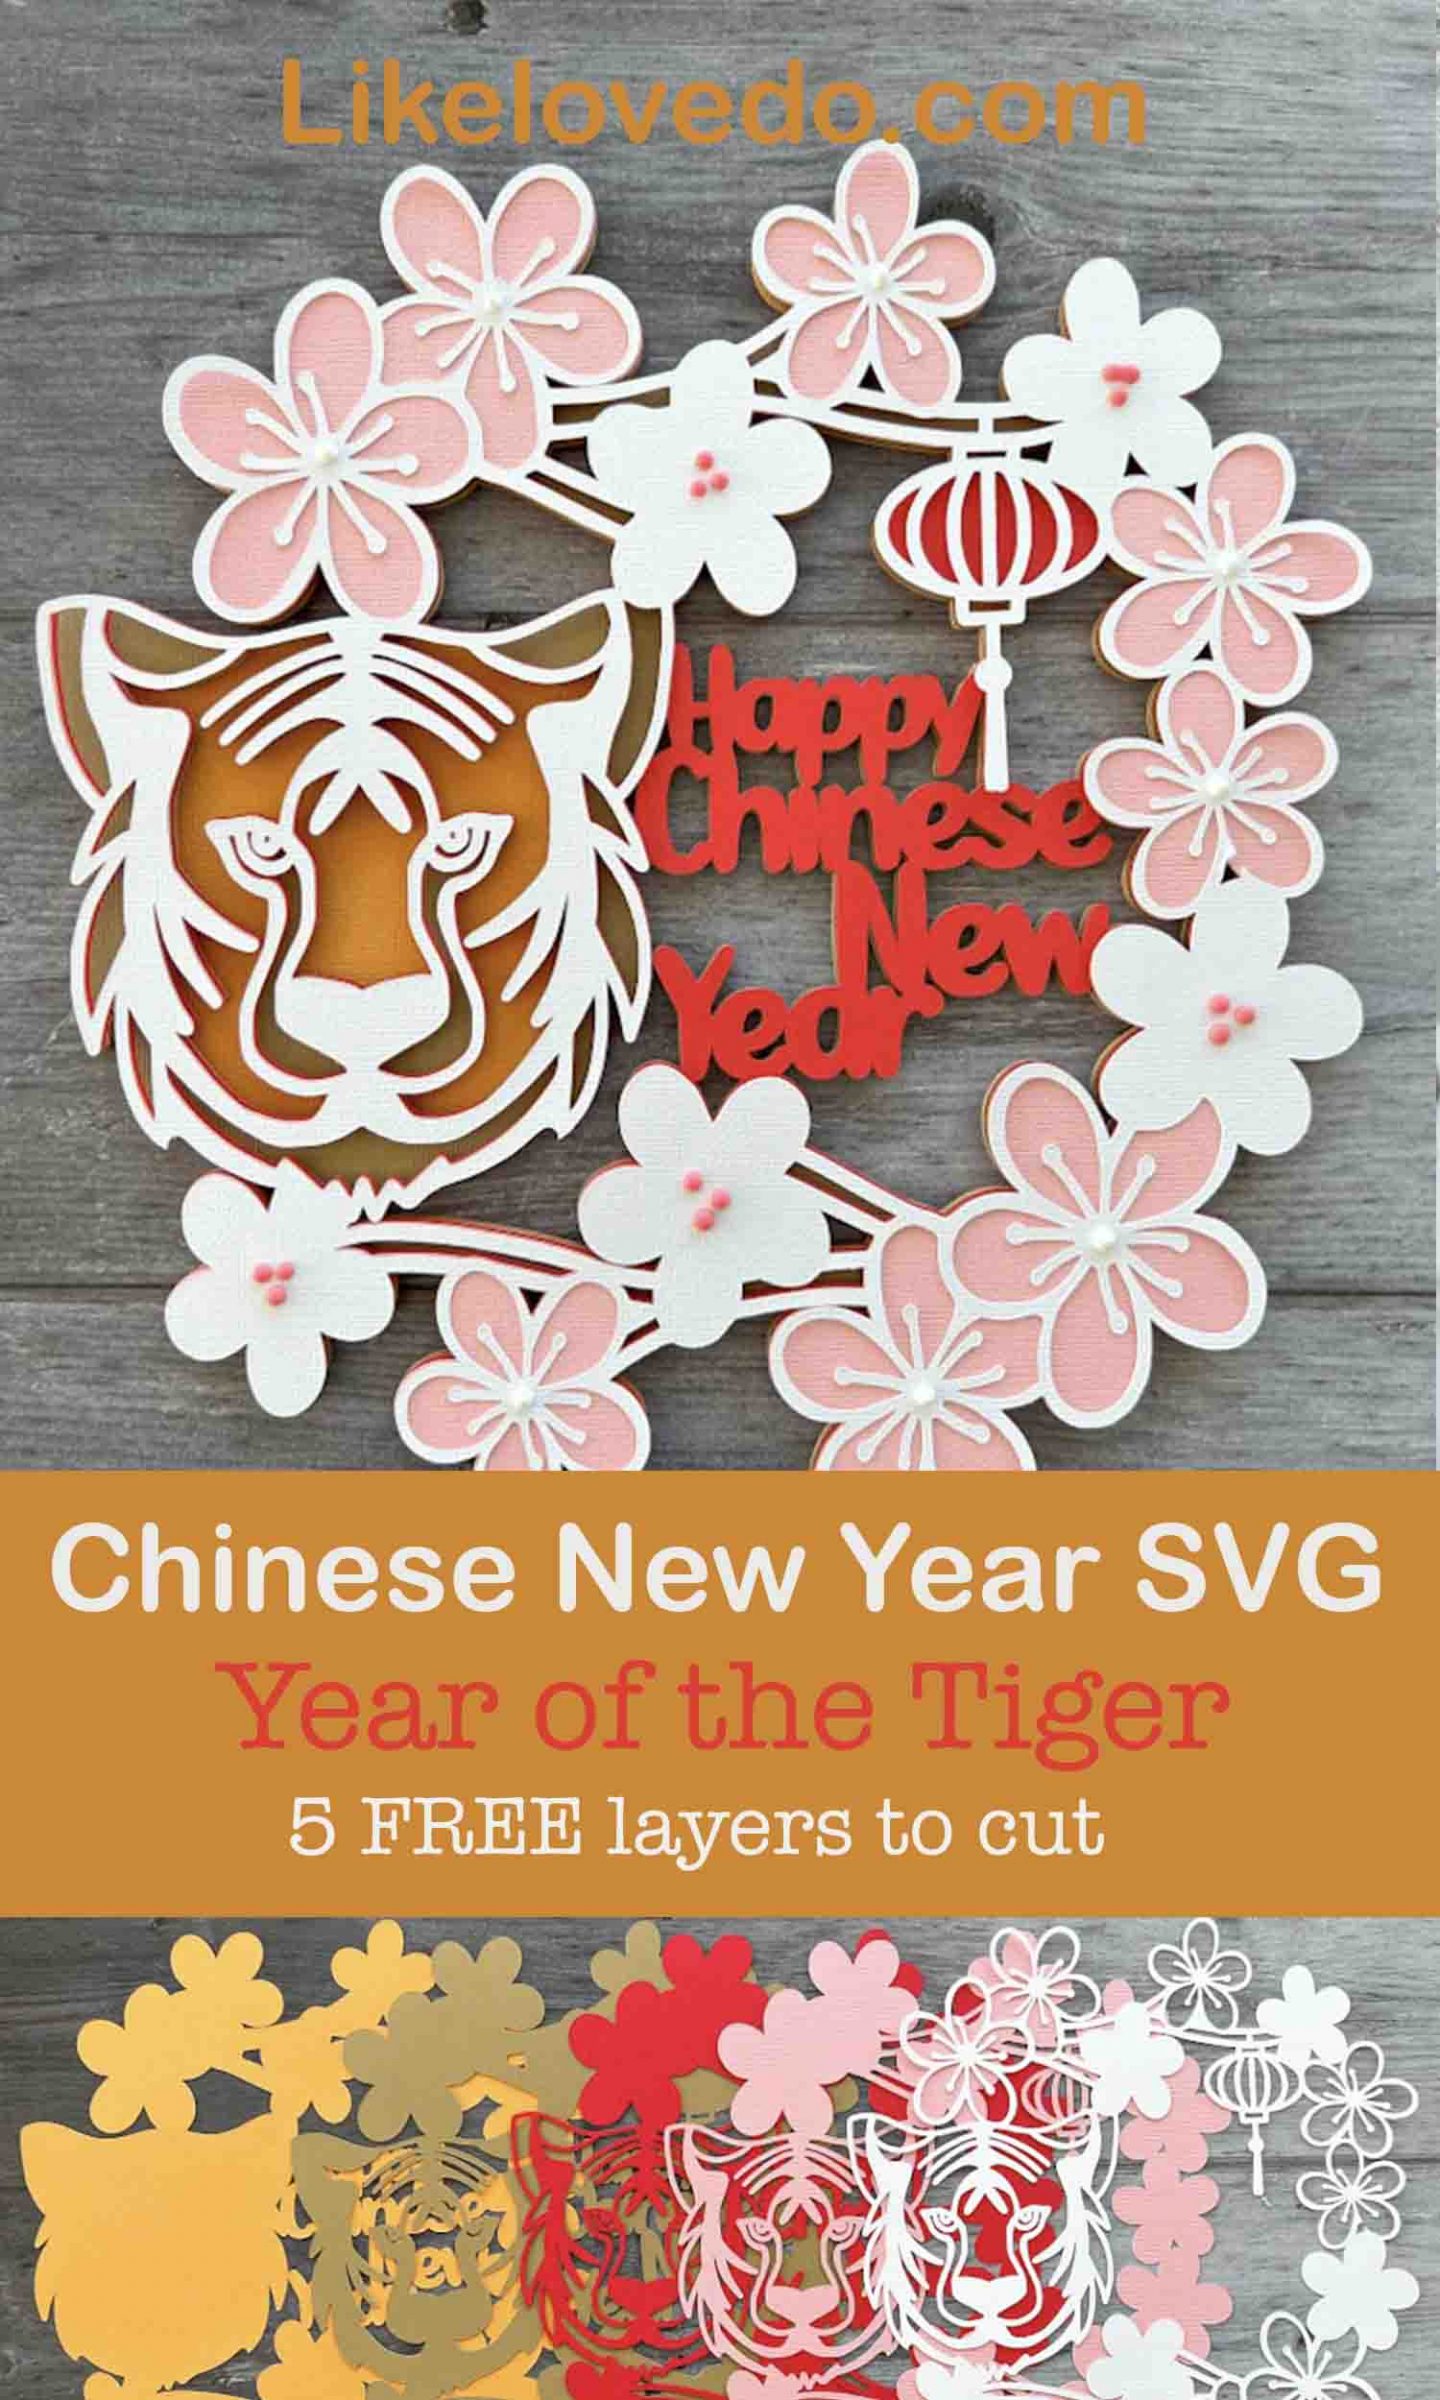 Chinese New Year tiger SVG free download for crafting